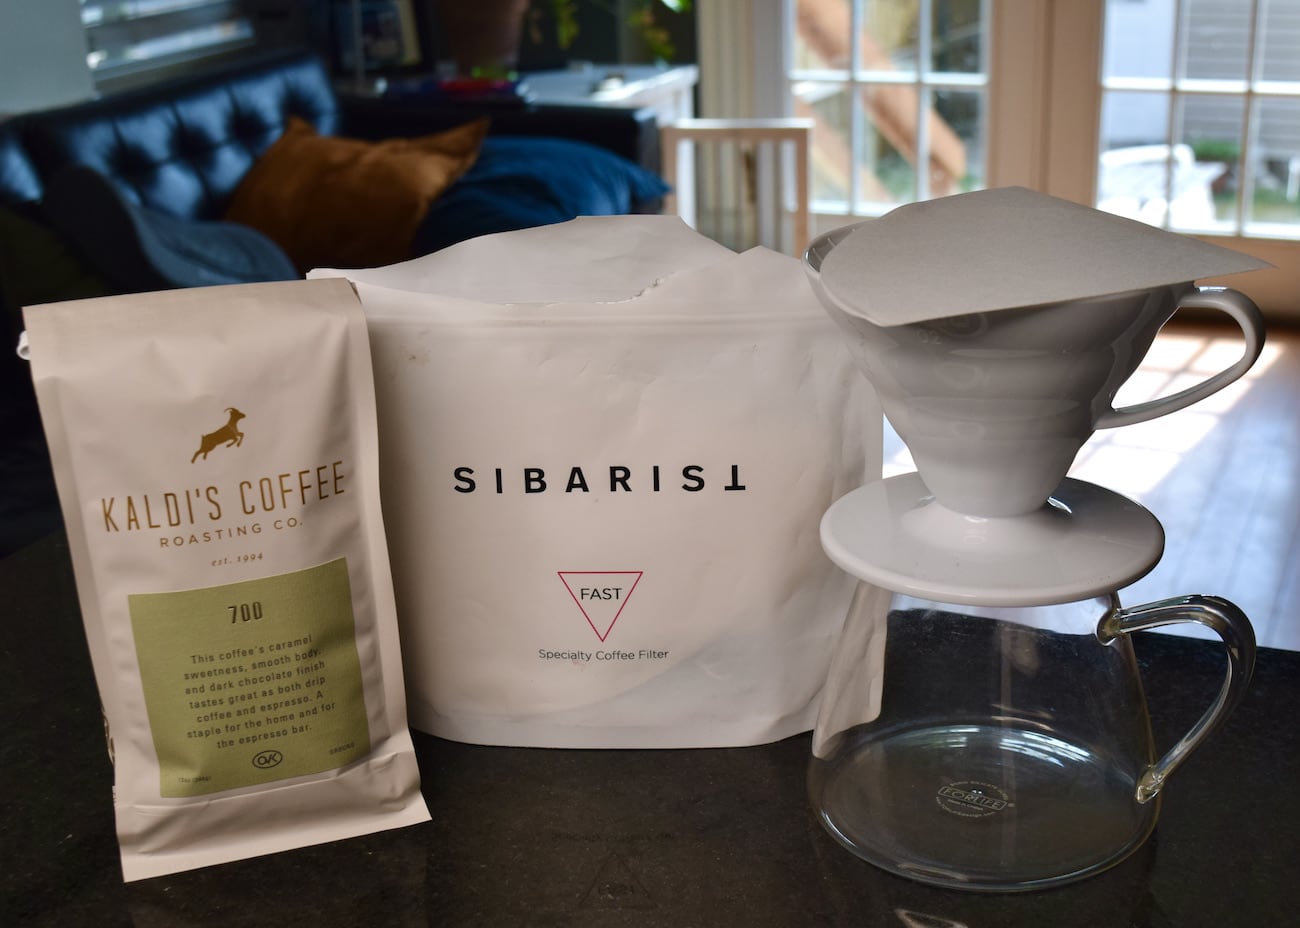 Sibarist Fast filters with a bag of 700 coffee blend and a v60